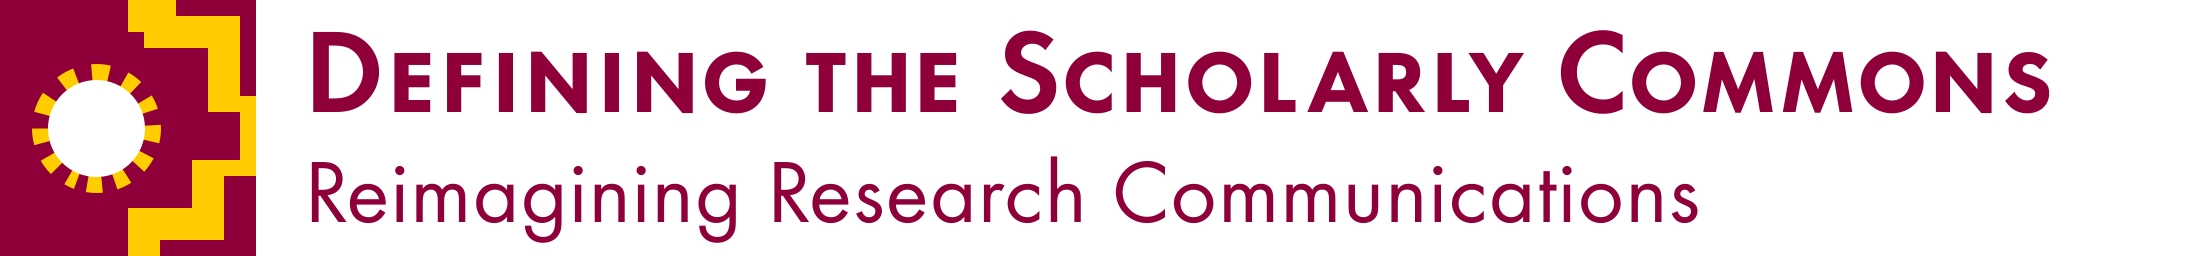 Defining the Scholalry Commons logo